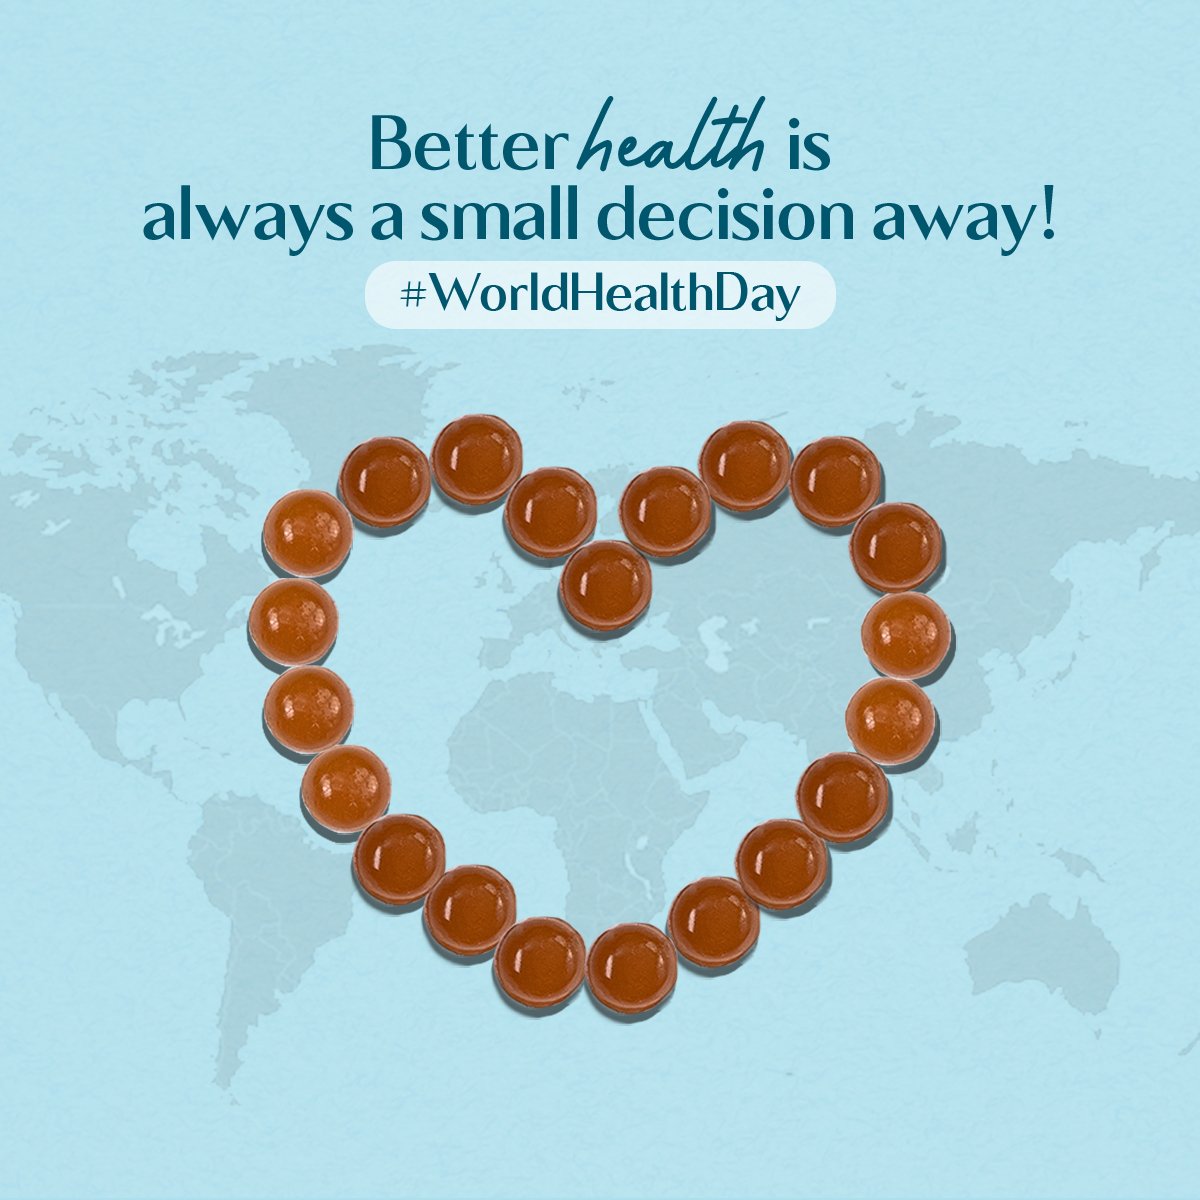 Good health doesnt have to be hard!’ ✨

This world health day lets take small positive choices everyday towards a healthier, happier self! 🌼❤️

#worldhealthday #healthforall #JustSmallThings #JST #smallsteps #MakeABigChange #nutraceutical #healthyhabits